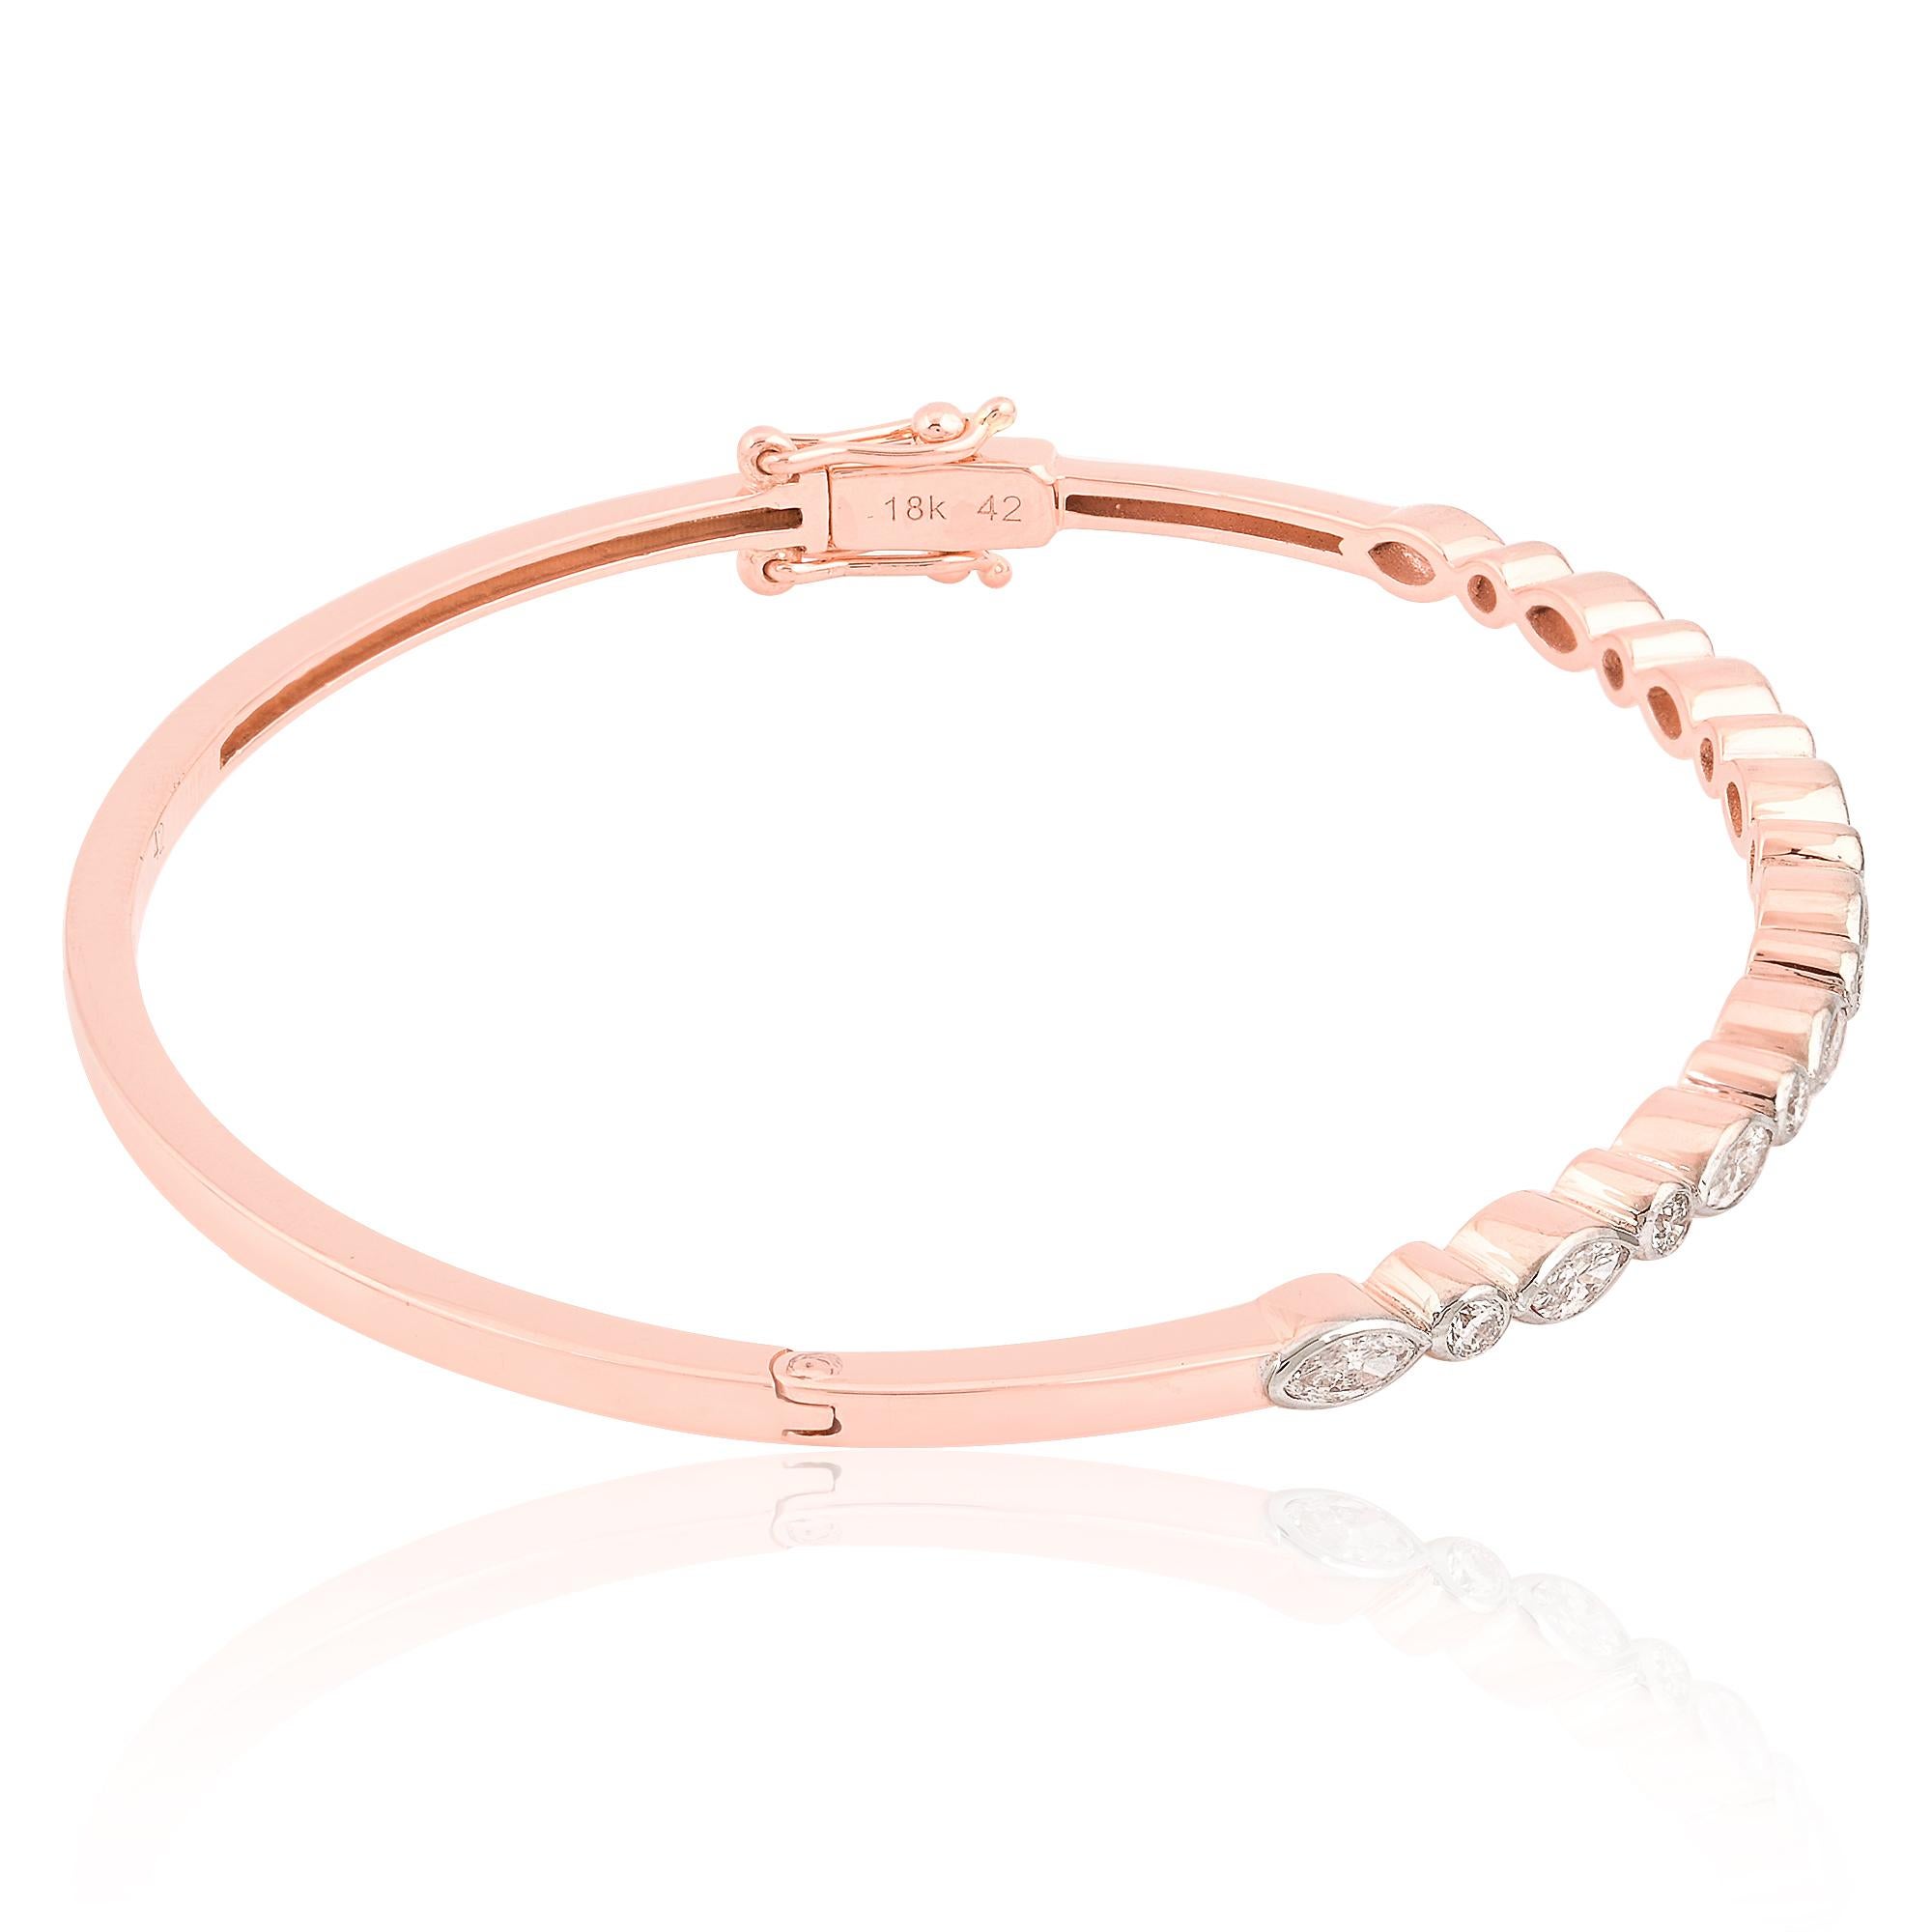 Each facet of this bangle bracelet is a testament to the artisanal expertise and attention to detail that goes into its creation. Crafted by skilled hands, the lustrous 14 Karat Rose Gold setting forms a perfect backdrop for the dazzling array of